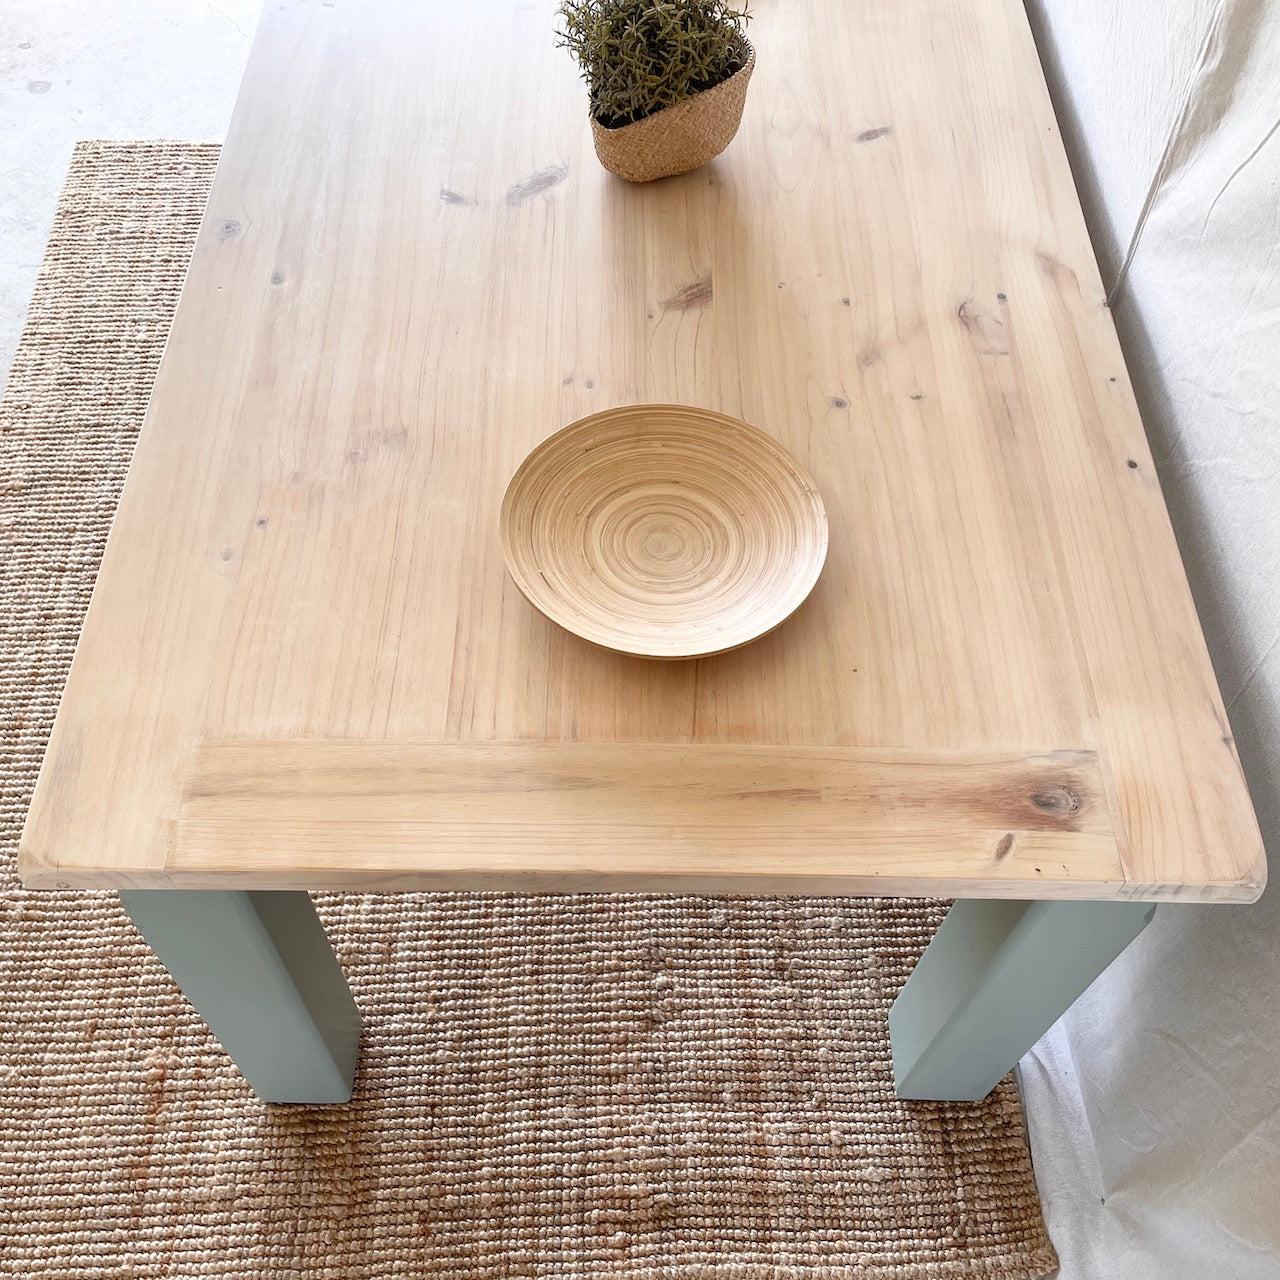 Hamptons Style Dining Room Table